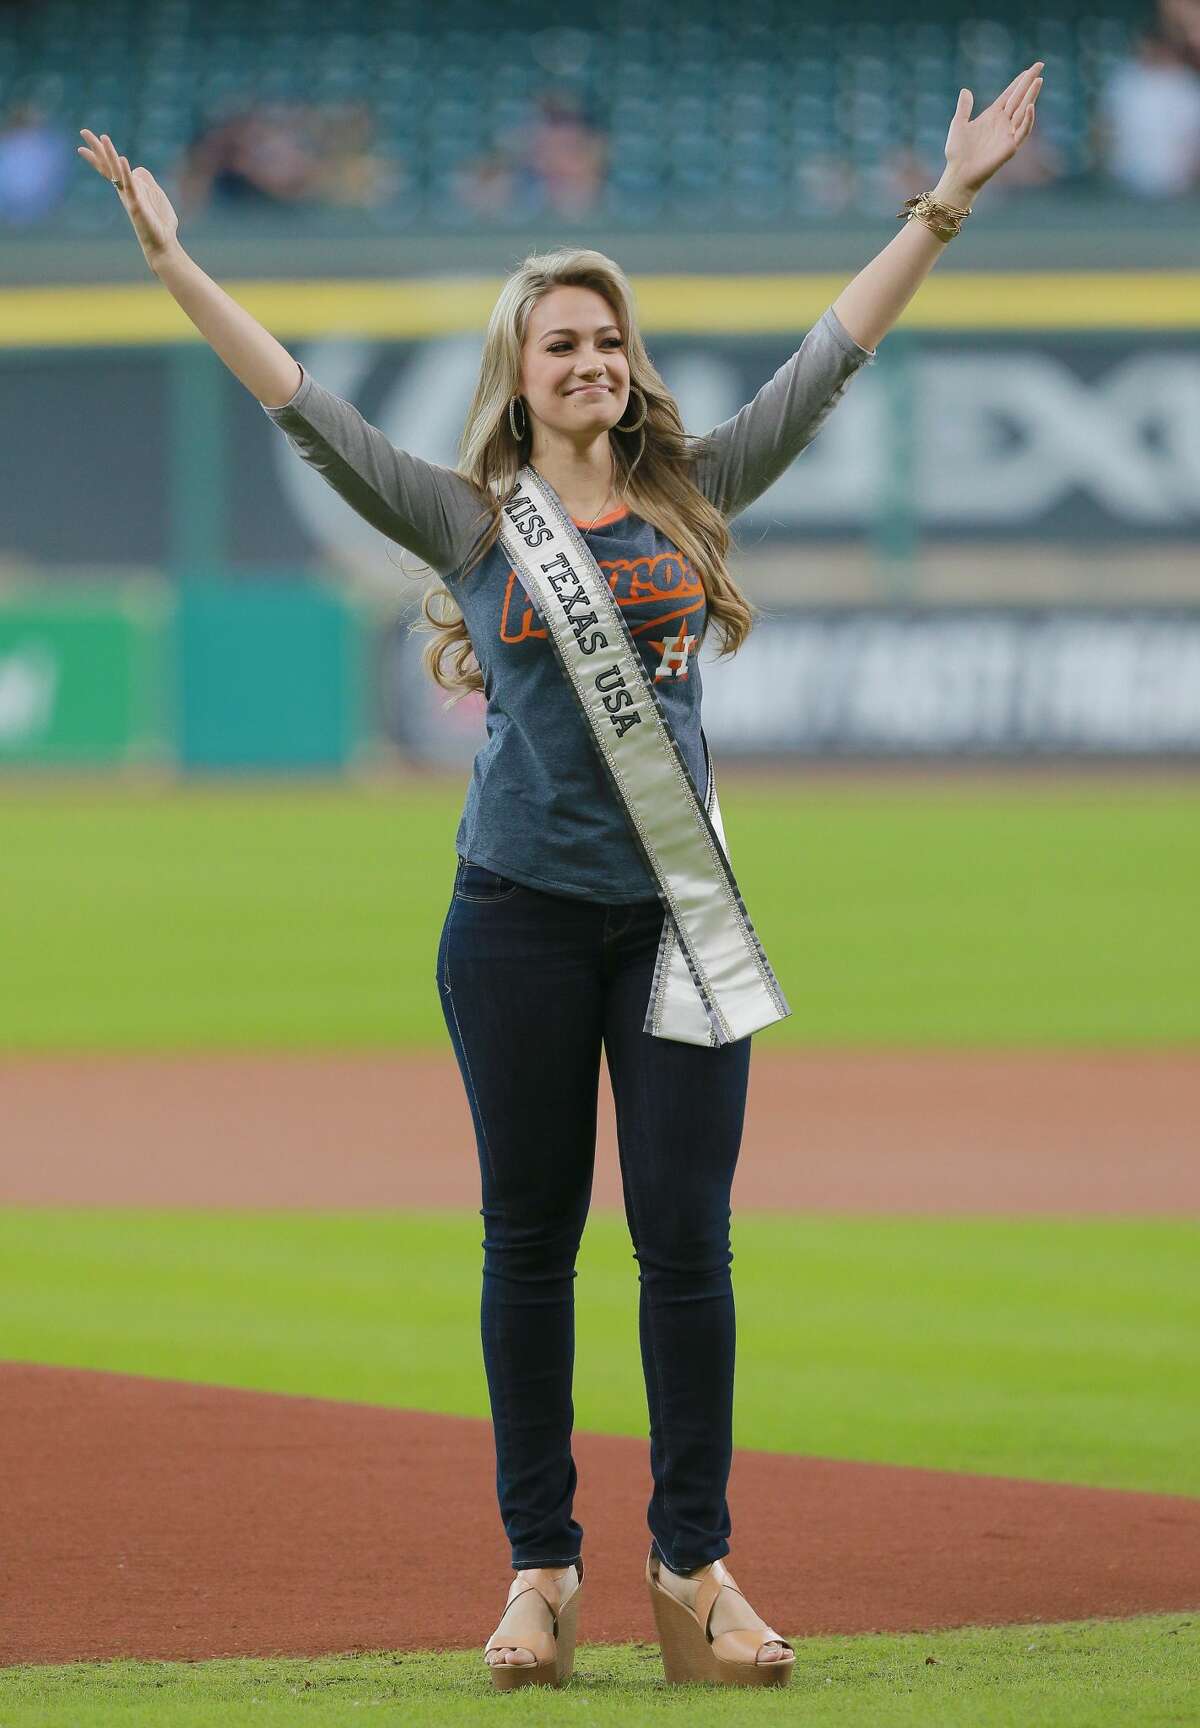 Miss Texas 2016 Daniella Rodriguez throws out ceremonial firtst pitch at Minute Maid Park on August 31, 2016 in Houston, Texas.